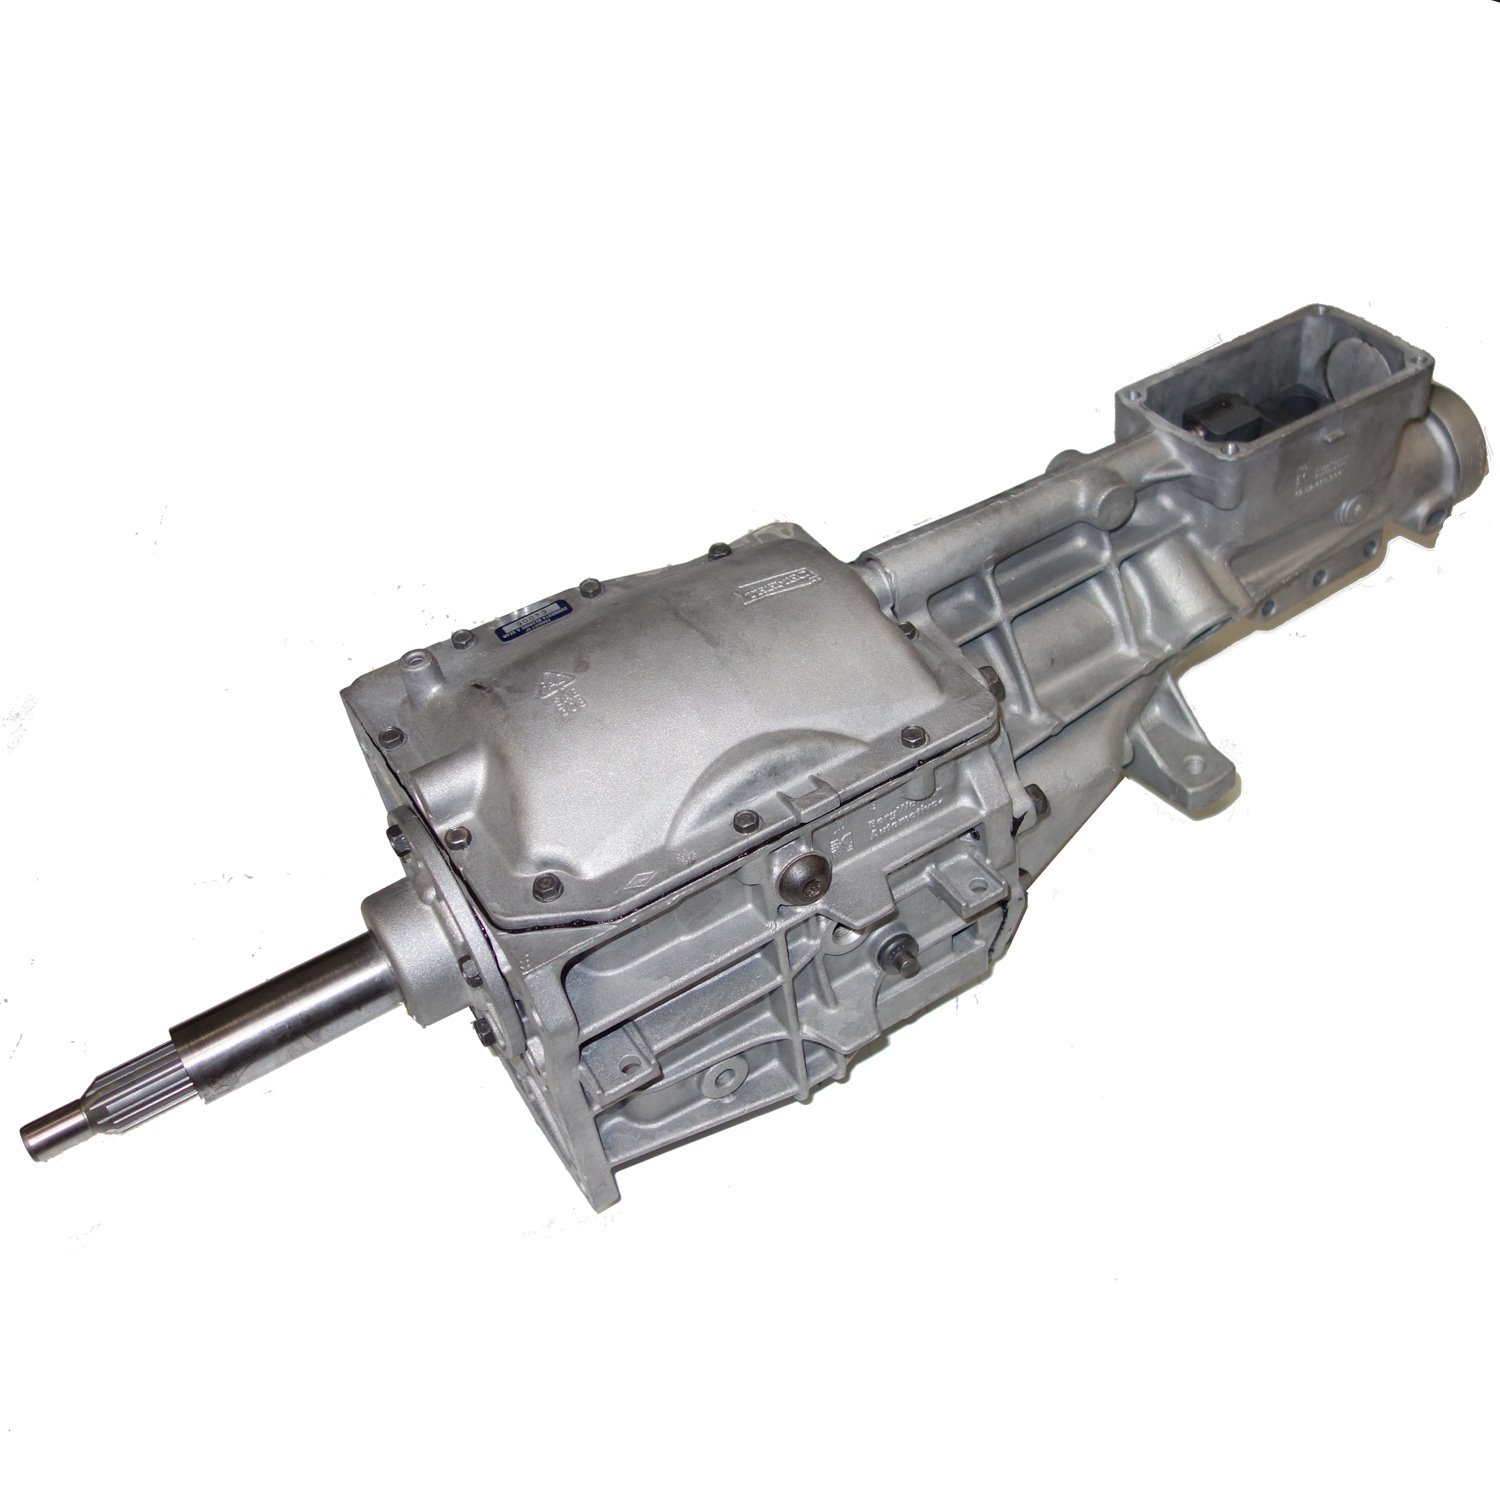 Remanufactured T5 Manual Transmission for Ford 94-95 Mustang, 5 Speed